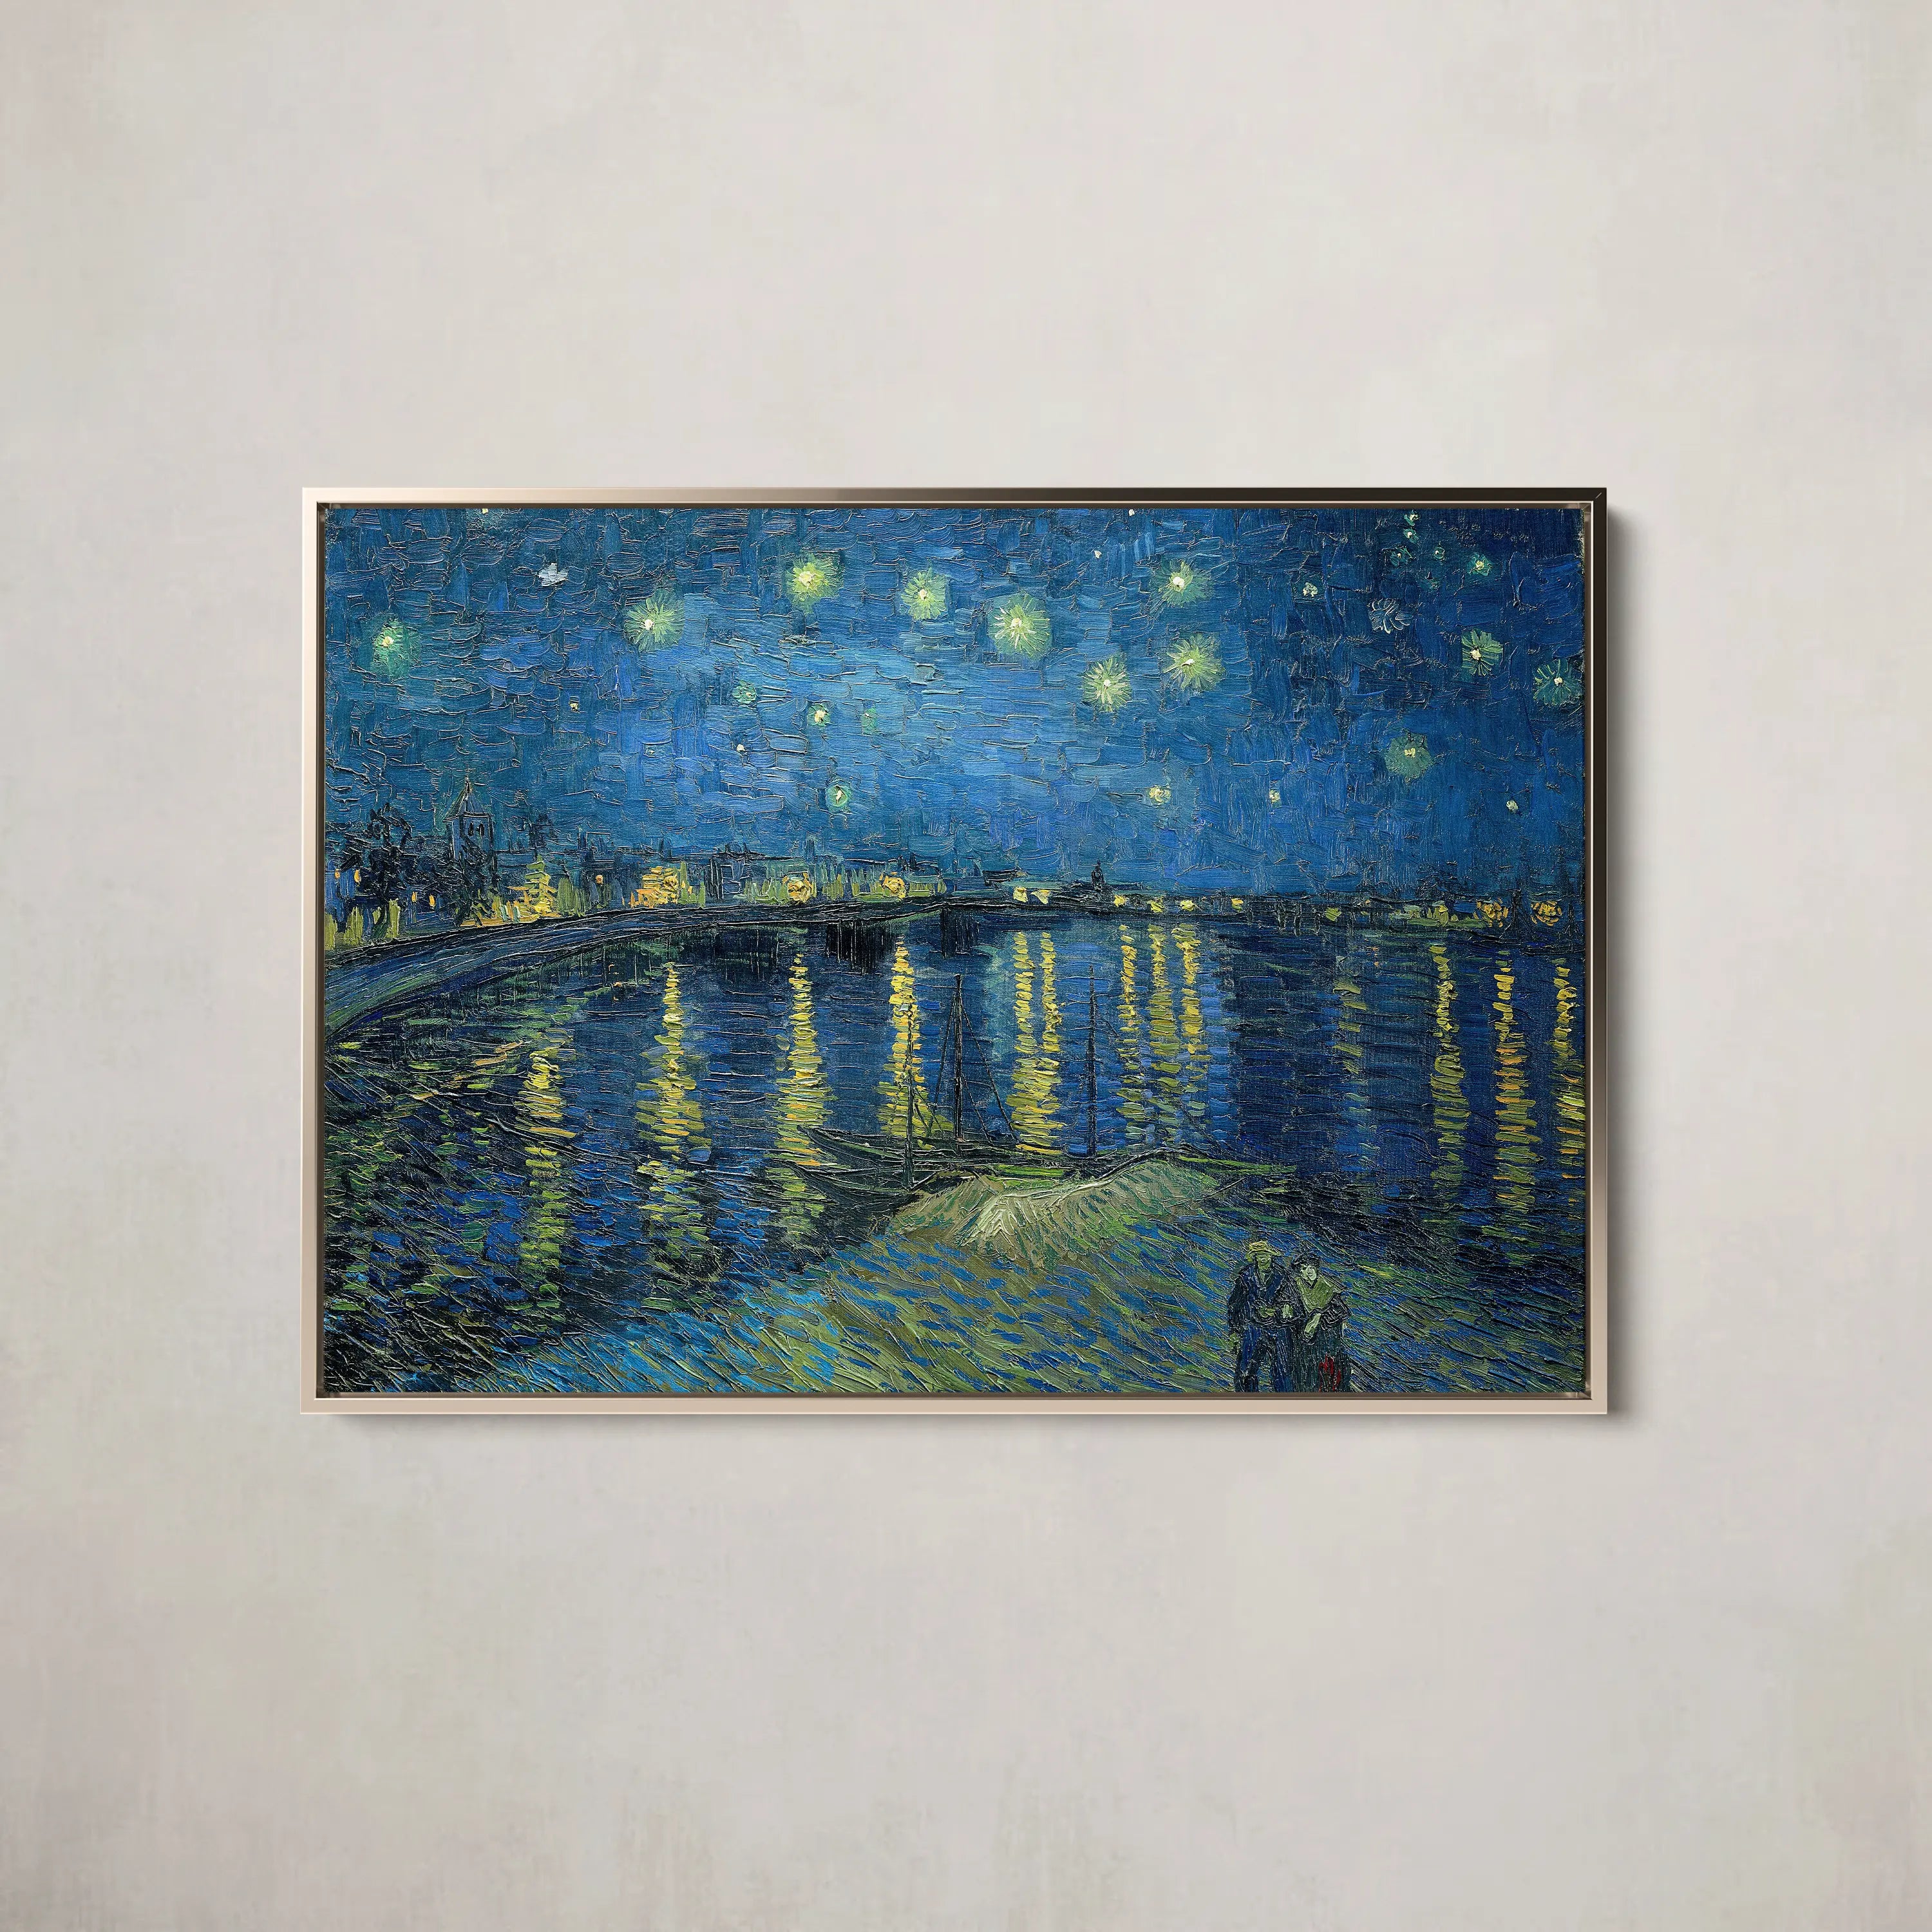 Starry Night Over the Rhone (1888) by Vincent van Gogh